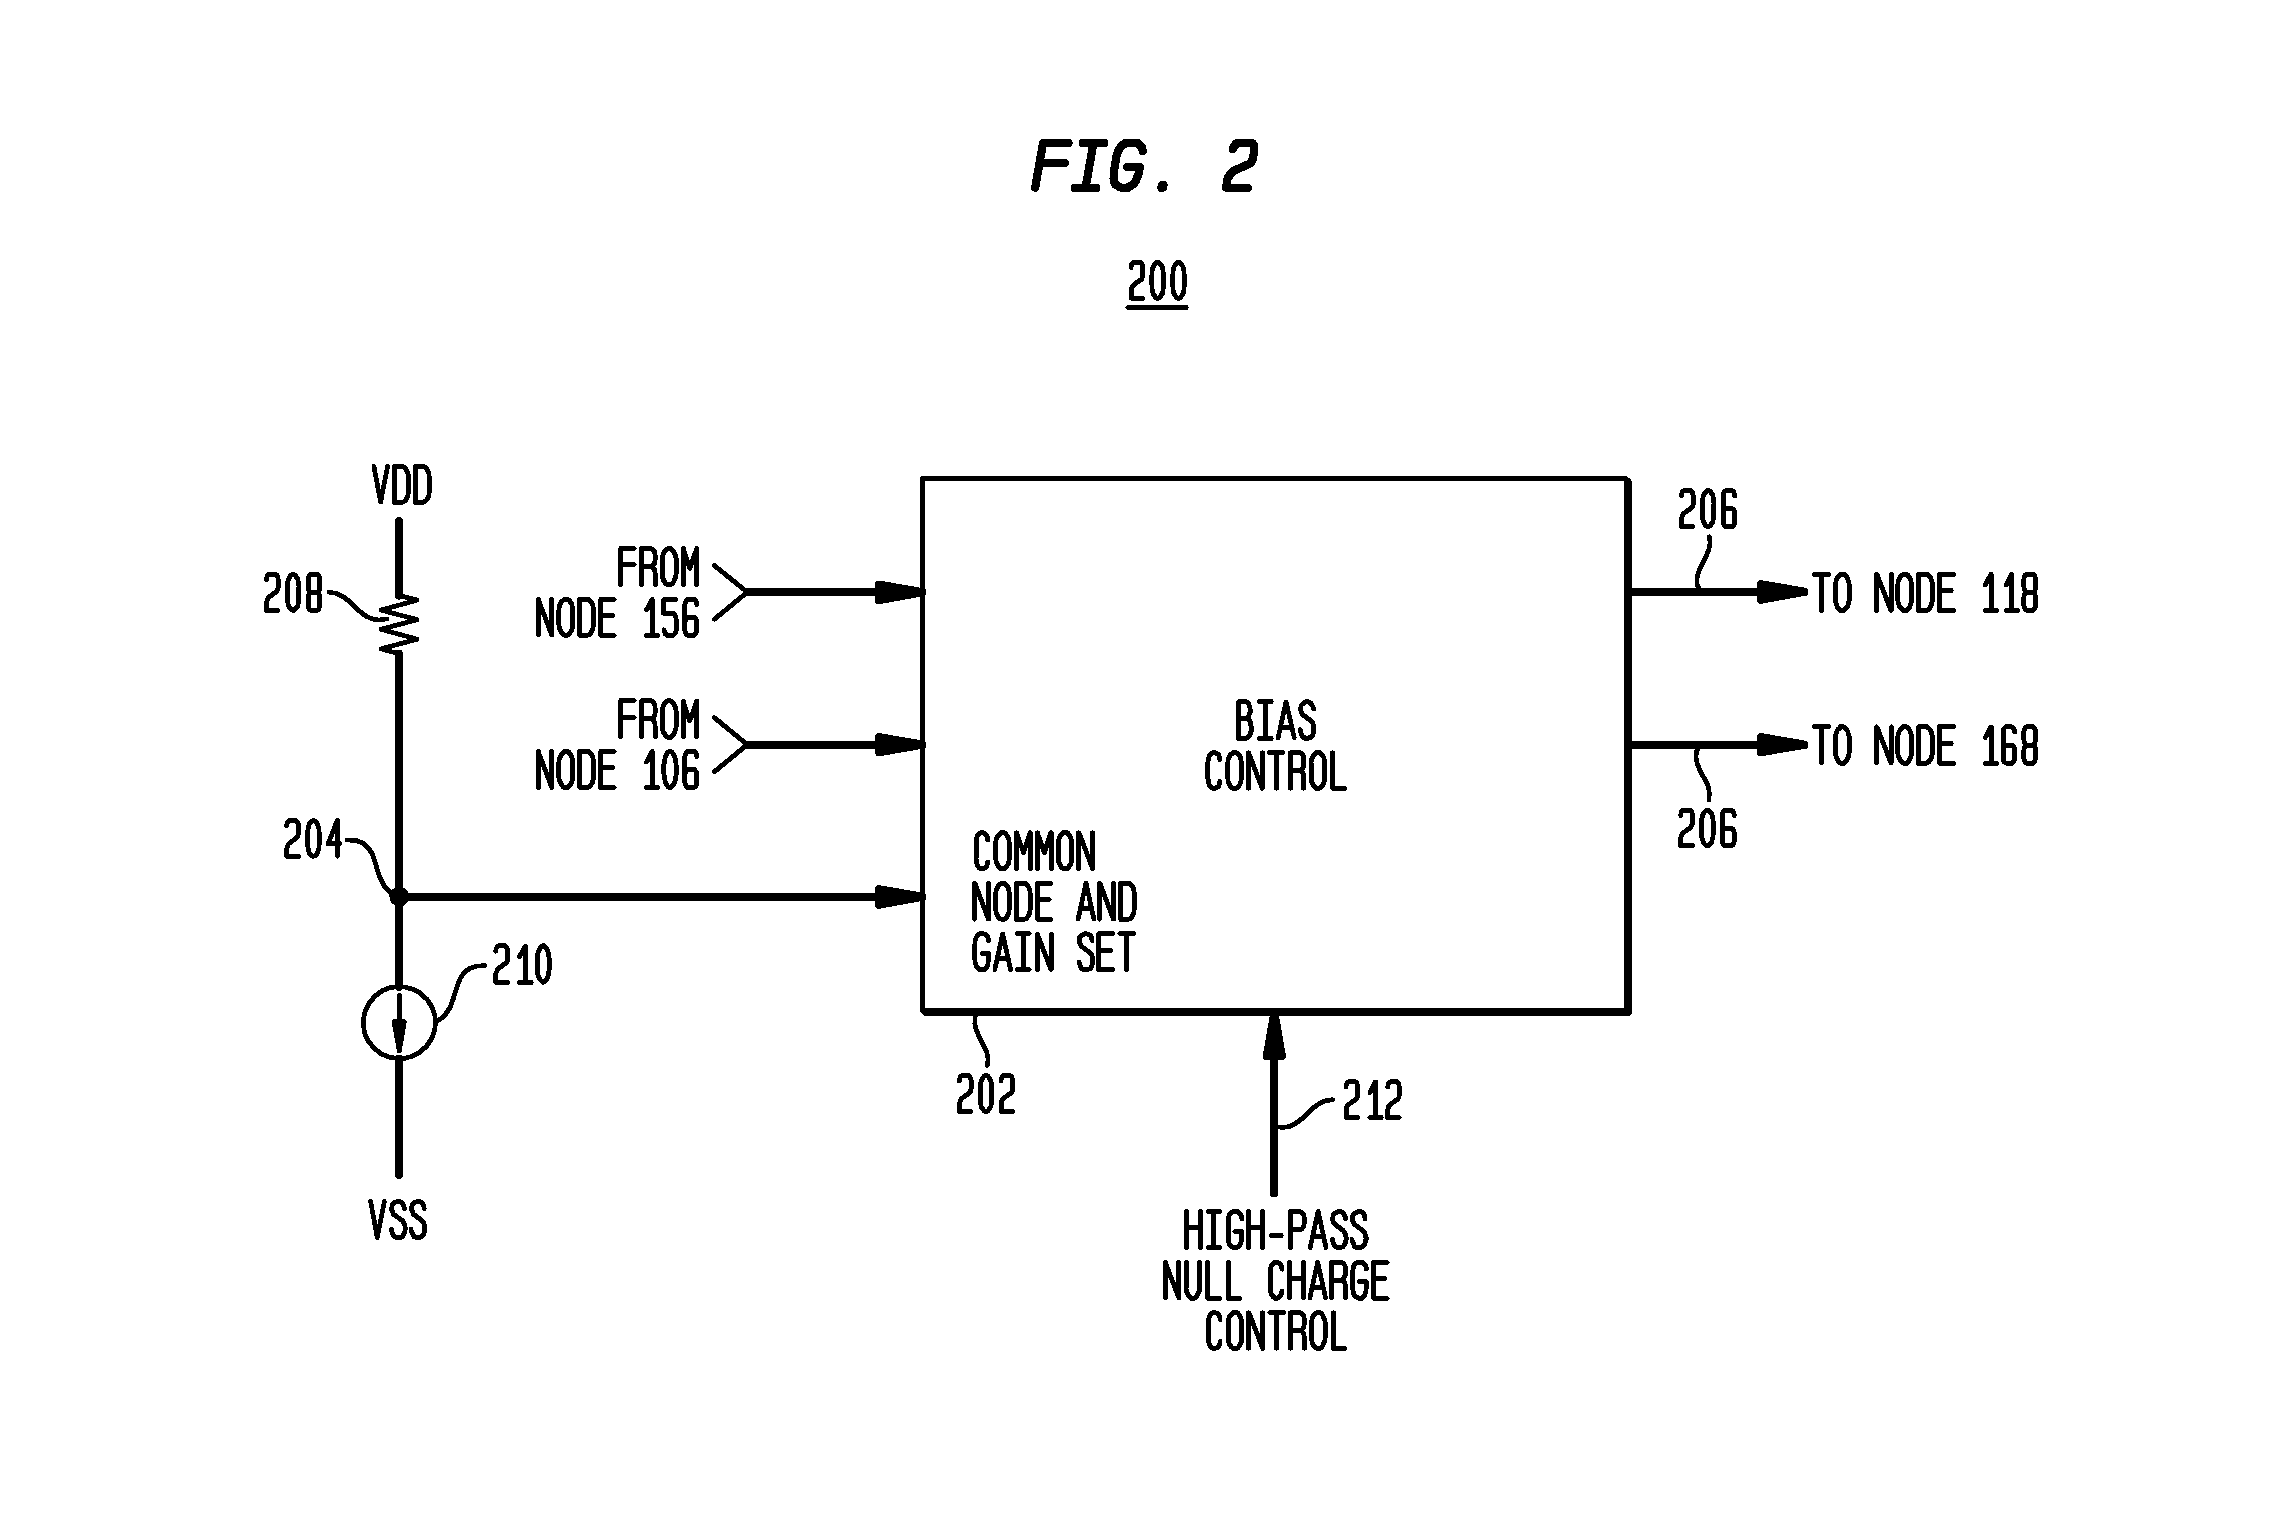 High impedance low noise cross-coupled amplifier for use in as a preamplifier in a magnetic data storage system